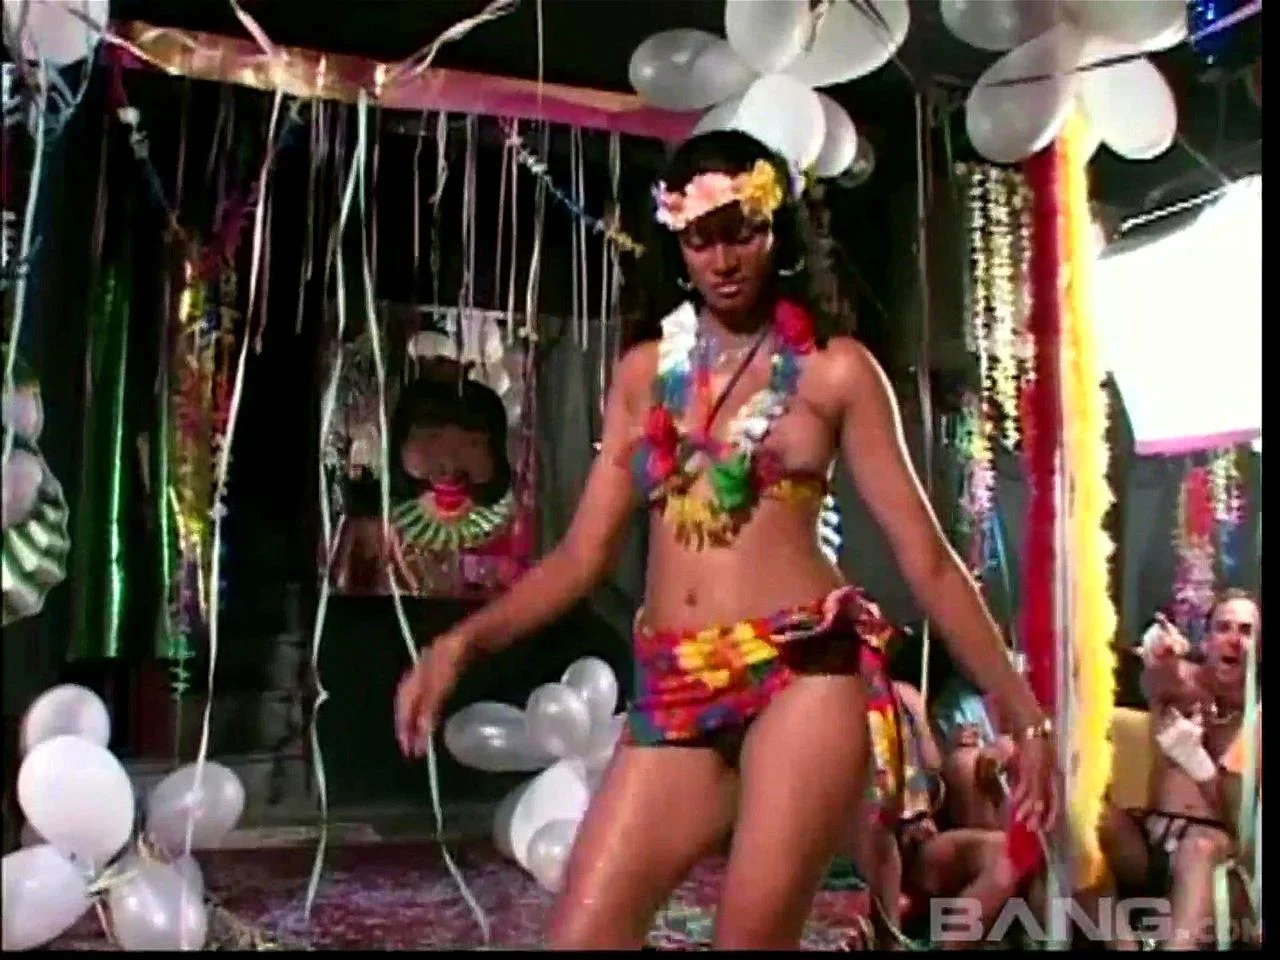 Miss Big Ass Brazil - Watch Miss Big Ass Brazil 1 (2002) upscaled and some color correction -  Carnaval, Retro, Classic Porn - SpankBang